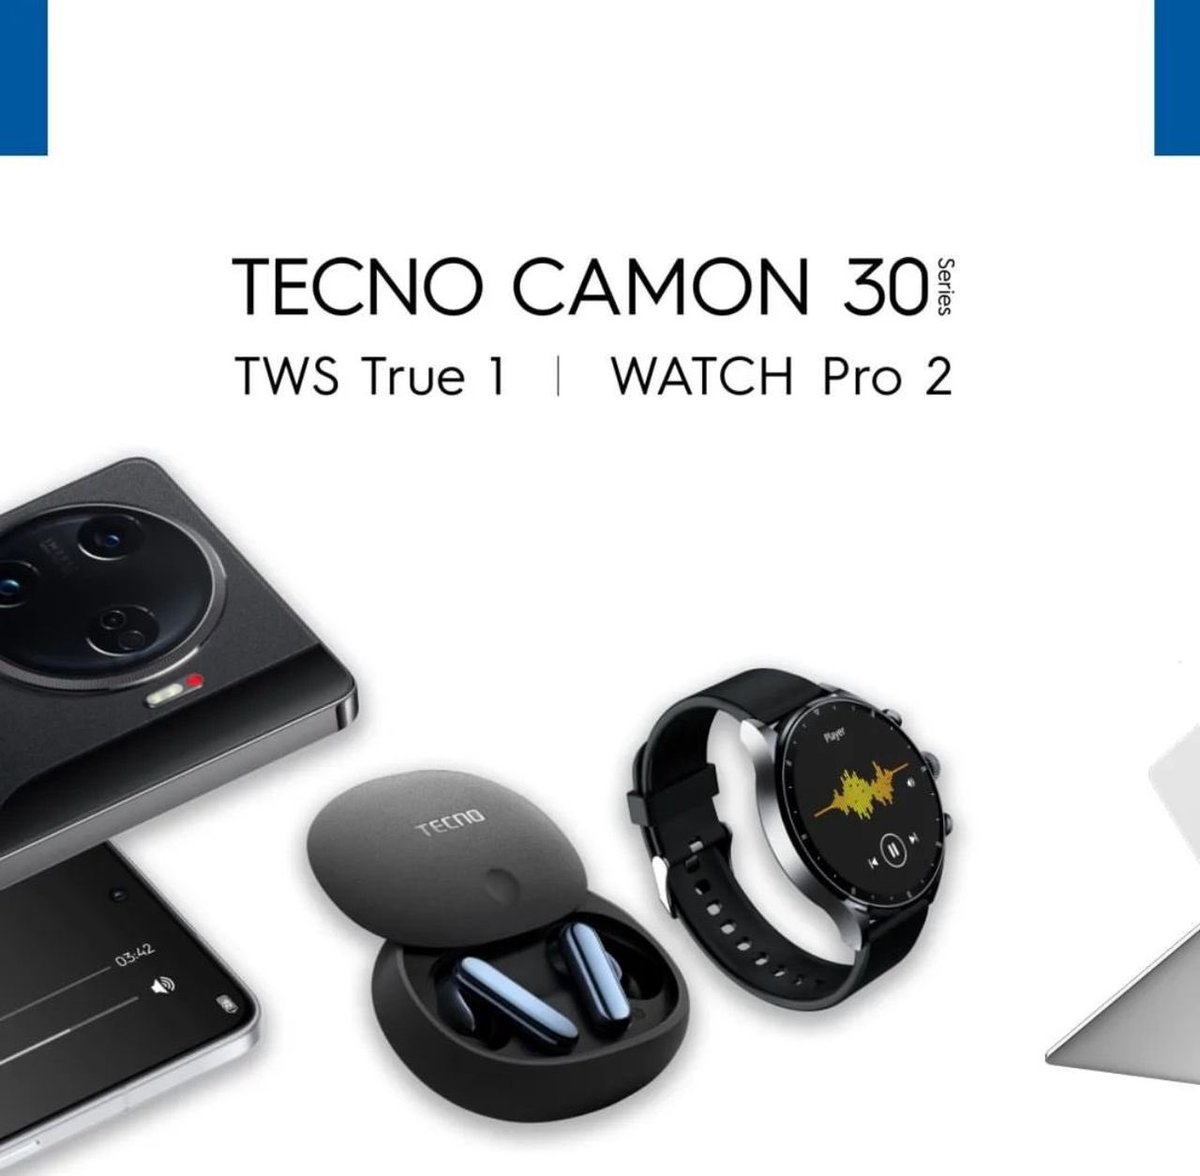 The new #CAMON30AIPhone comes with TWS True 1 earbuds that supports ANC,equiped with one of the best Sony Sensors the IMX 890 which is far better than the iPhone 14 Pro Max Sony IMX803. Buy the Camon 30 at the @TECNOMobileUG flagship store #TECNOArenaMall to win some goodies.